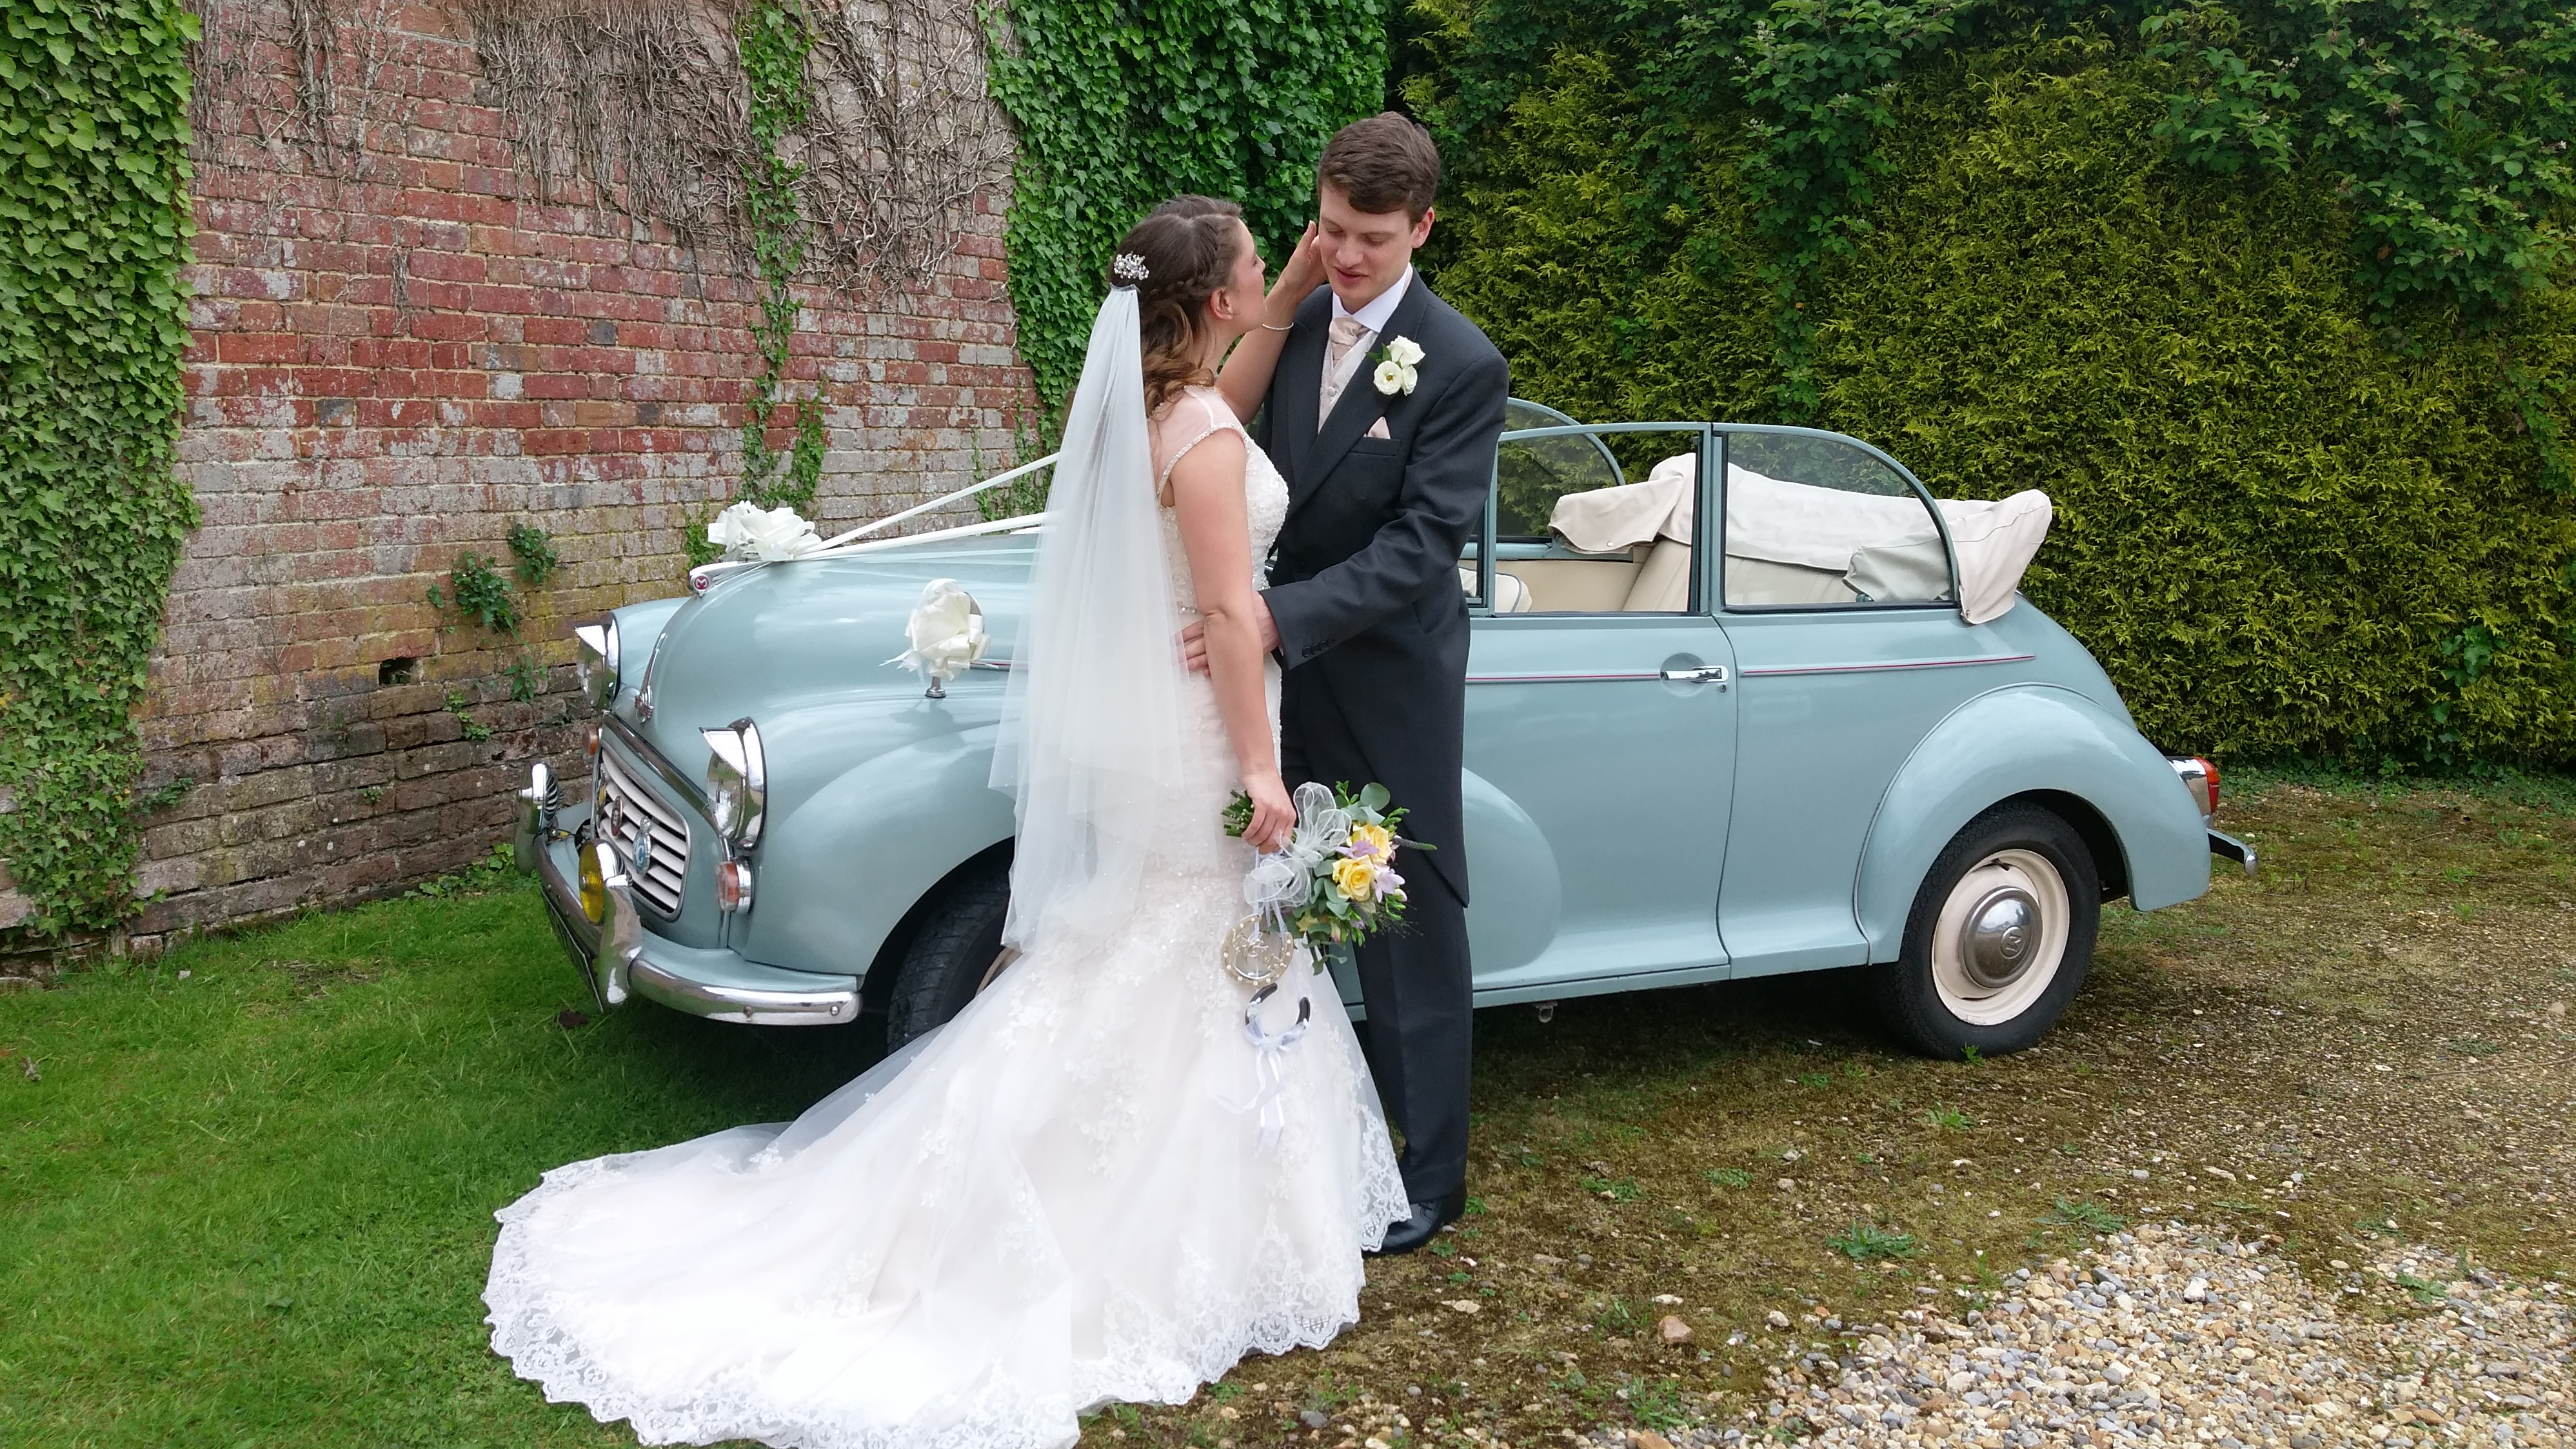 Cadnam-based Classic Morris Minor with ribbons and bow in light blue with its roof open showing a light cream interior. Bride and Groom are in front of the vehicle posing for their wedding photographer.